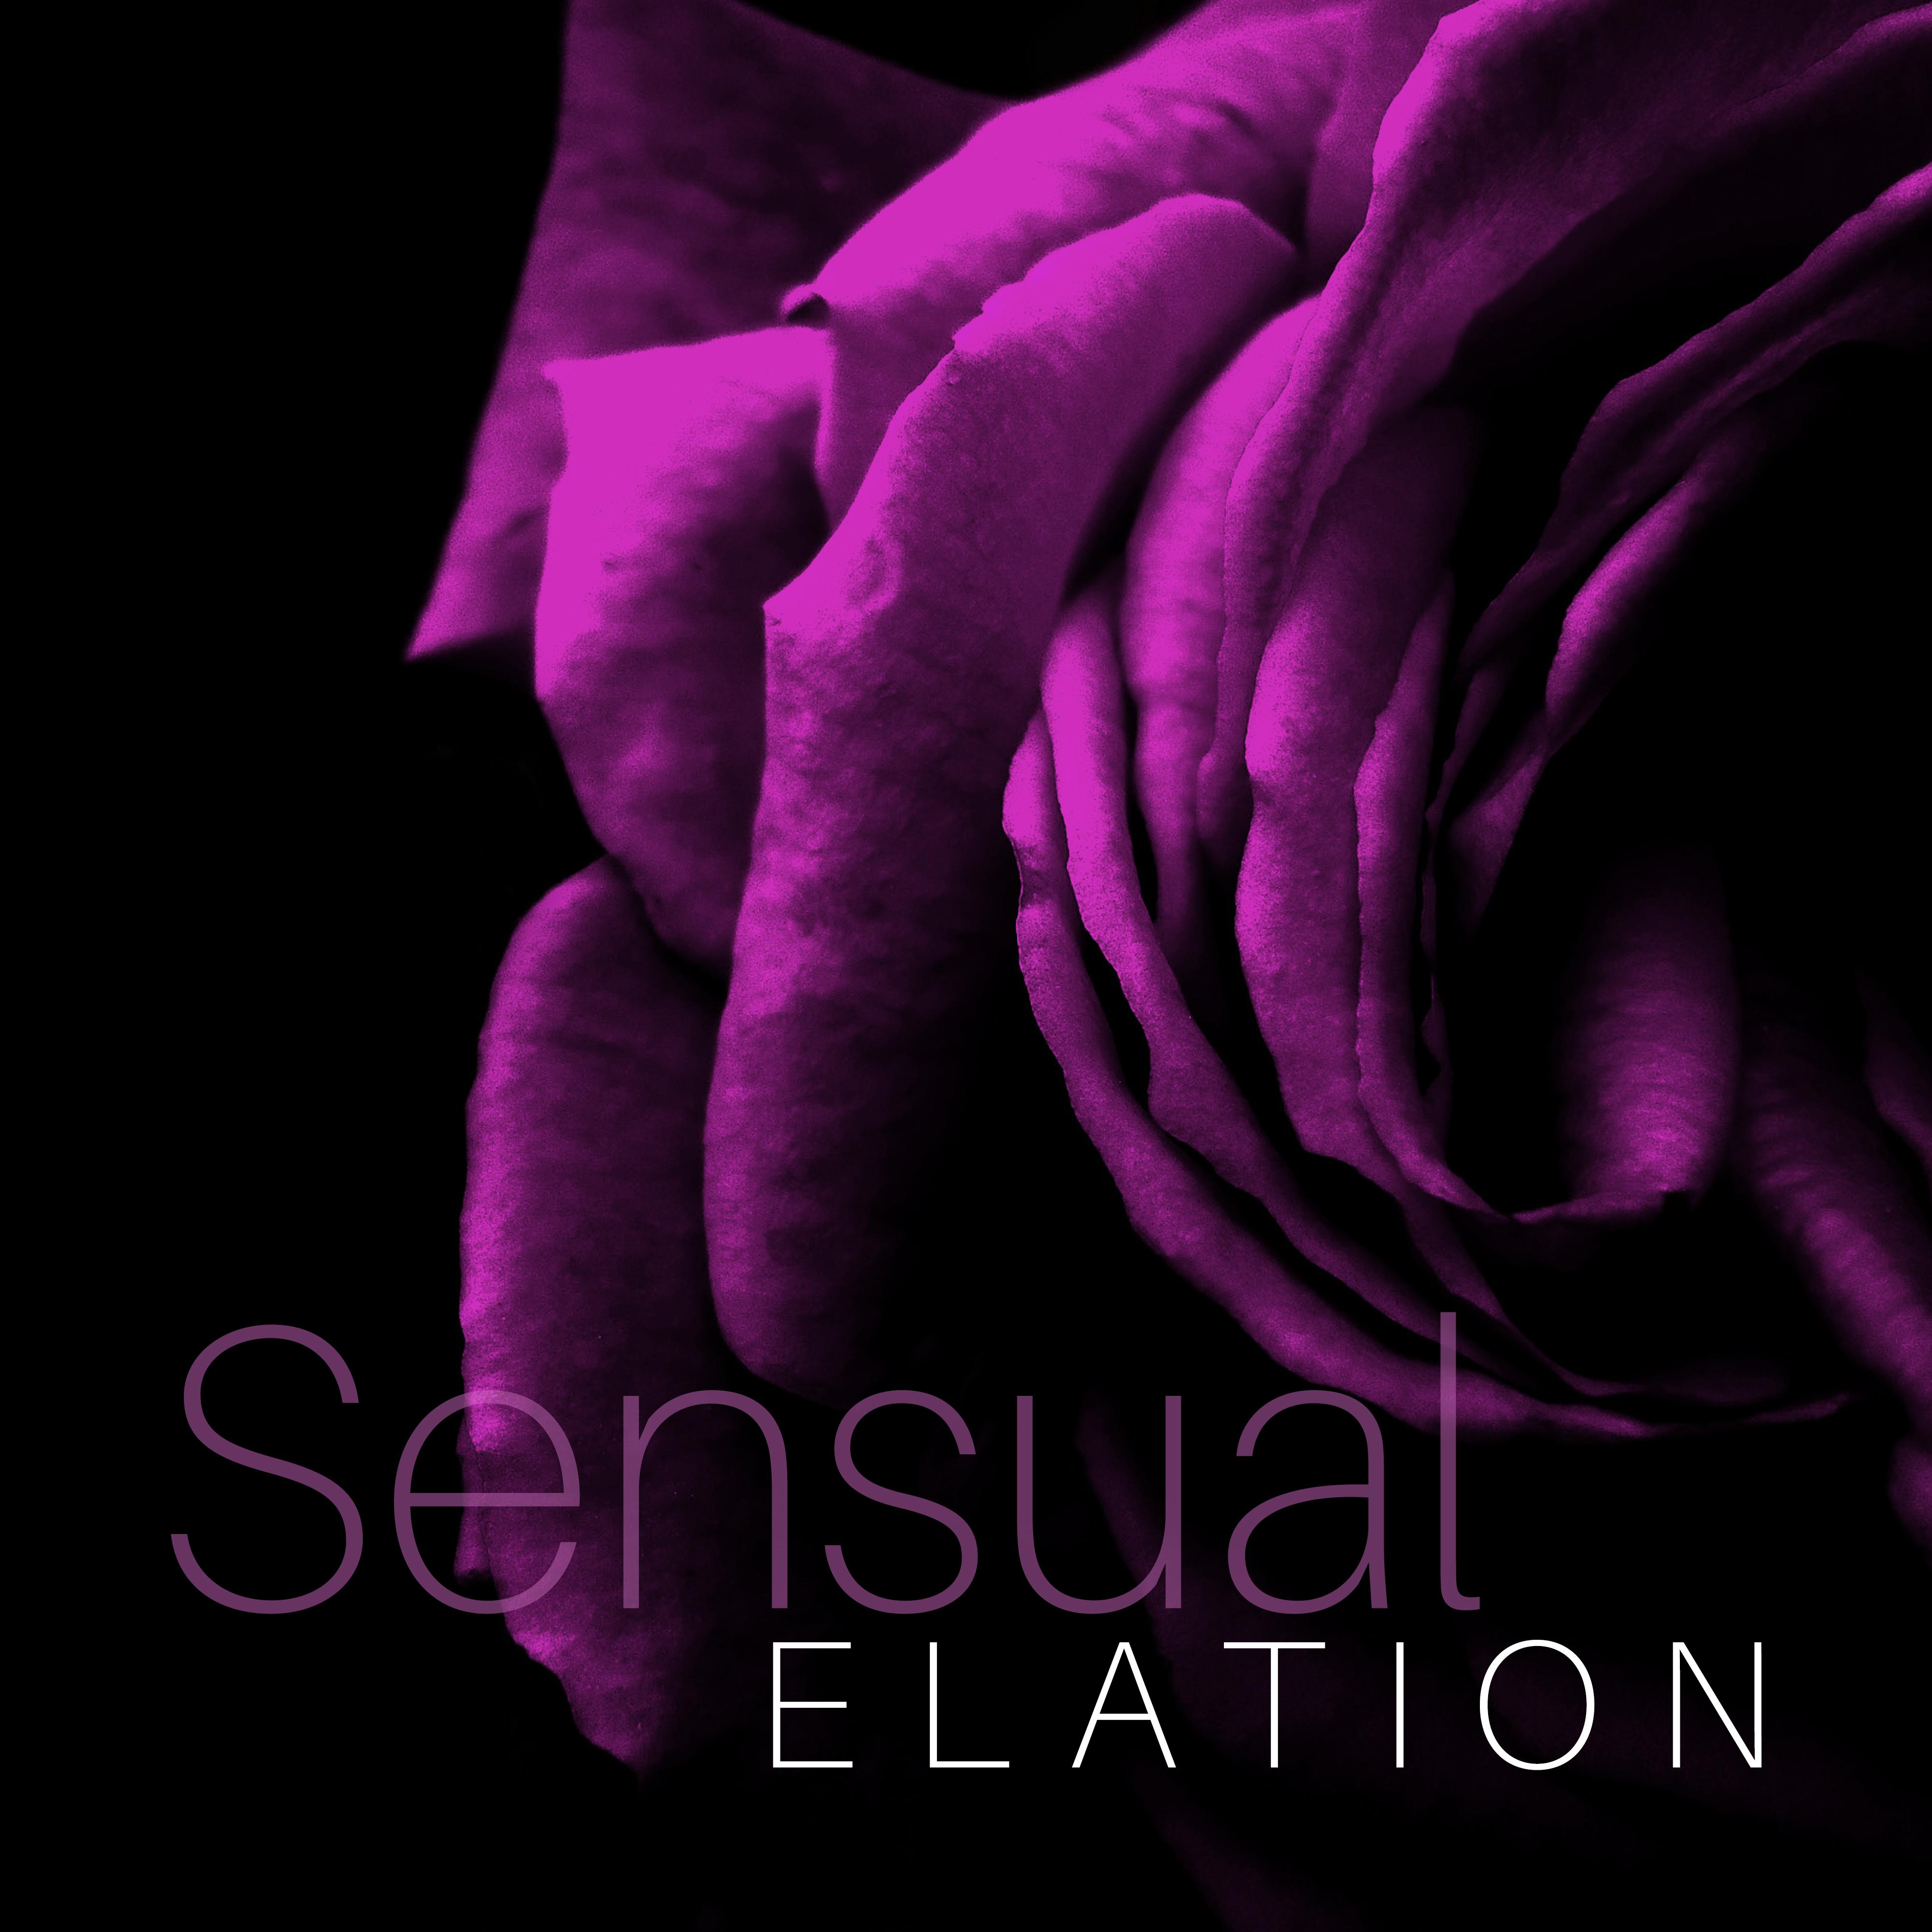 Sensual Elation – **** Jazz Music, Deep Massage, Erotic Dance, Romantic Jazz for Two, Dinner by Candlelight, Making Love, Piano Relaxation